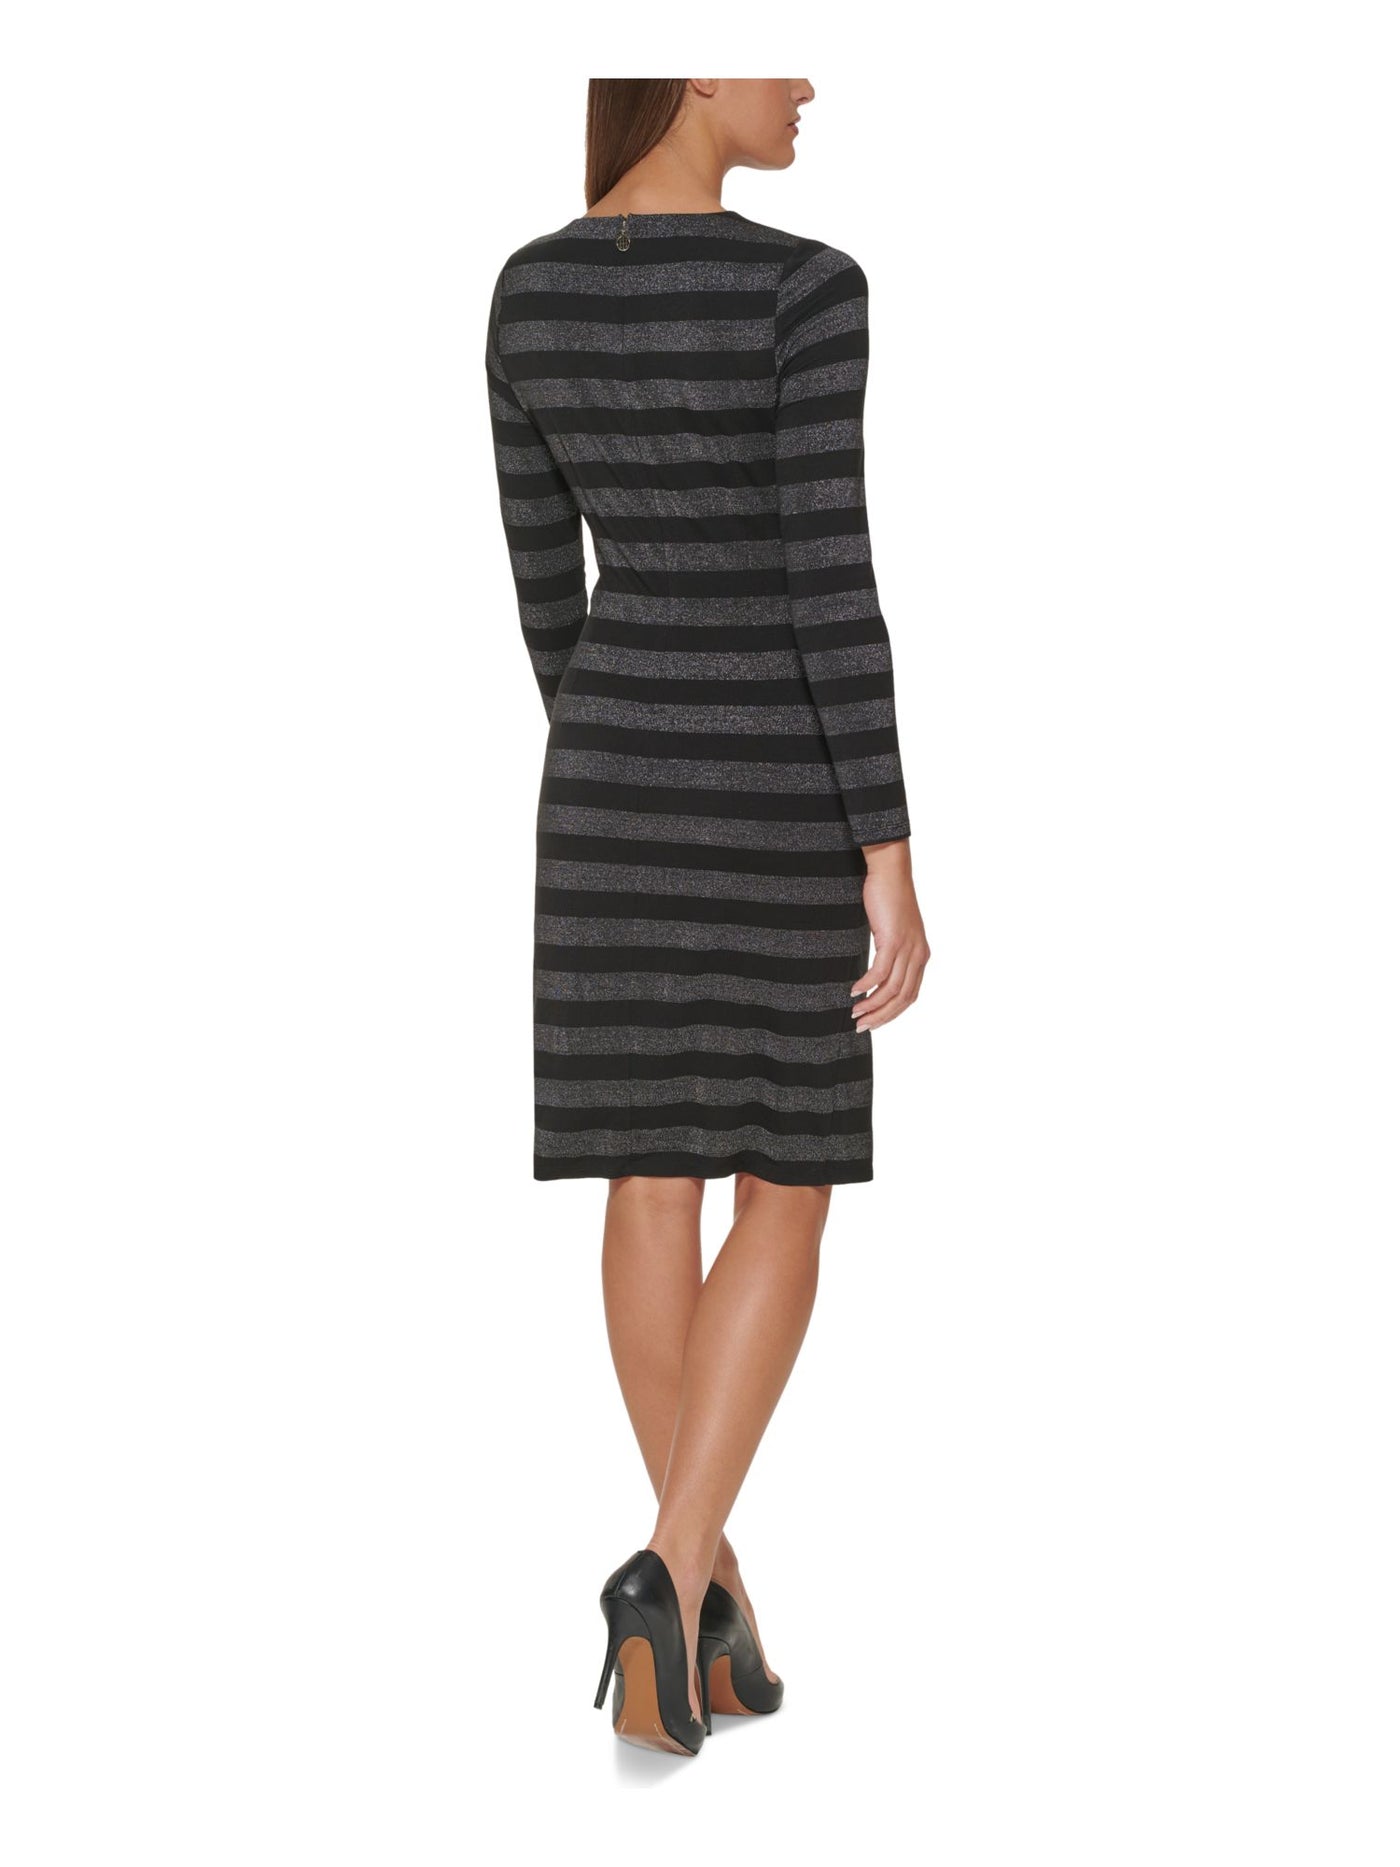 TOMMY HILFIGER Womens Black Zippered Unlined Twisted At Waist Striped Long Sleeve Round Neck Knee Length Sheath Dress 4